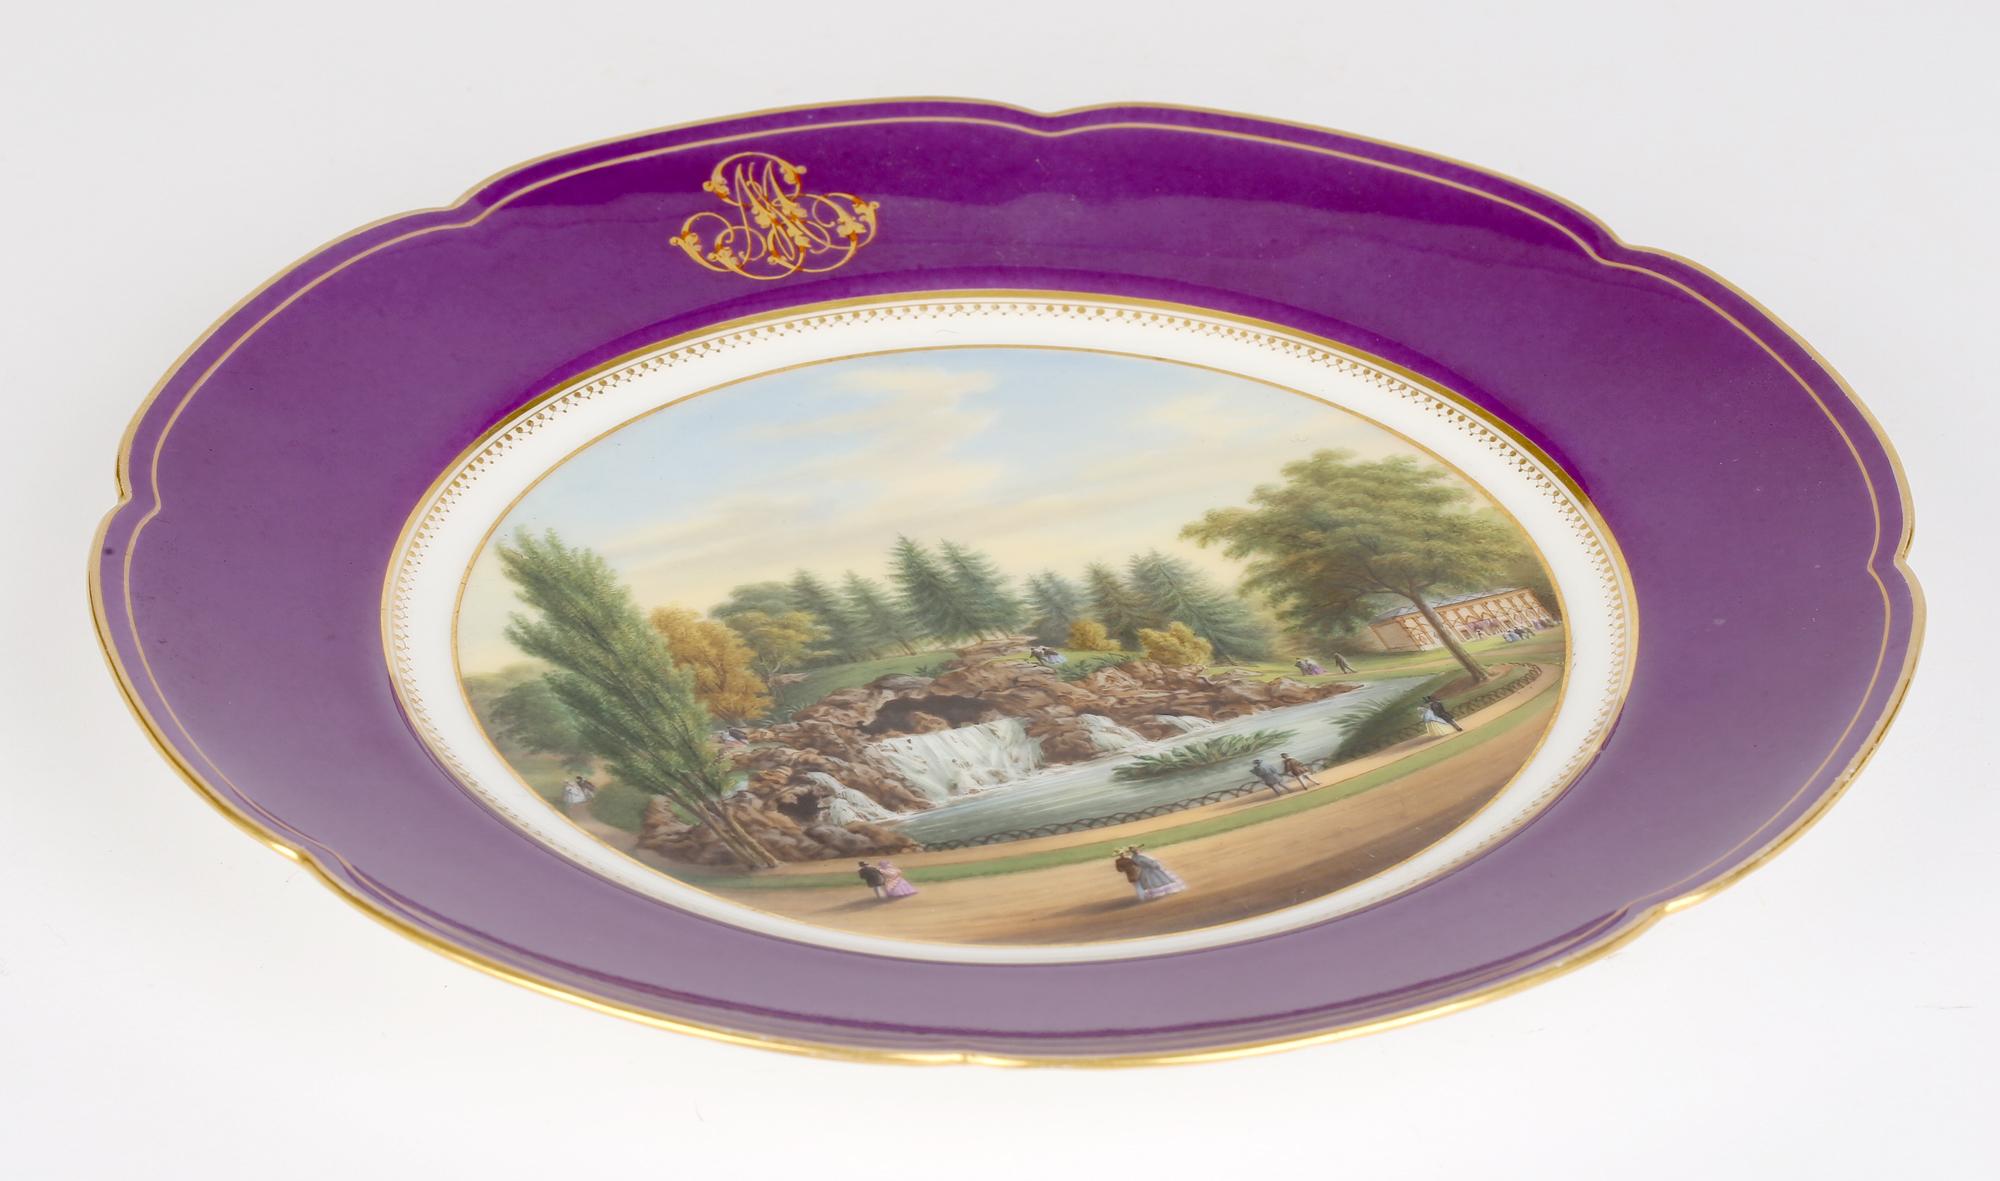 A very fine and exquisitely hand painted French porcelain cabinet plate with a scene titled Grande Cascade du Bois de Boulogne made by Lahoche et Pannier, Palais Royal, Paris and dating from around 1870. The scene is beautifully painted and set